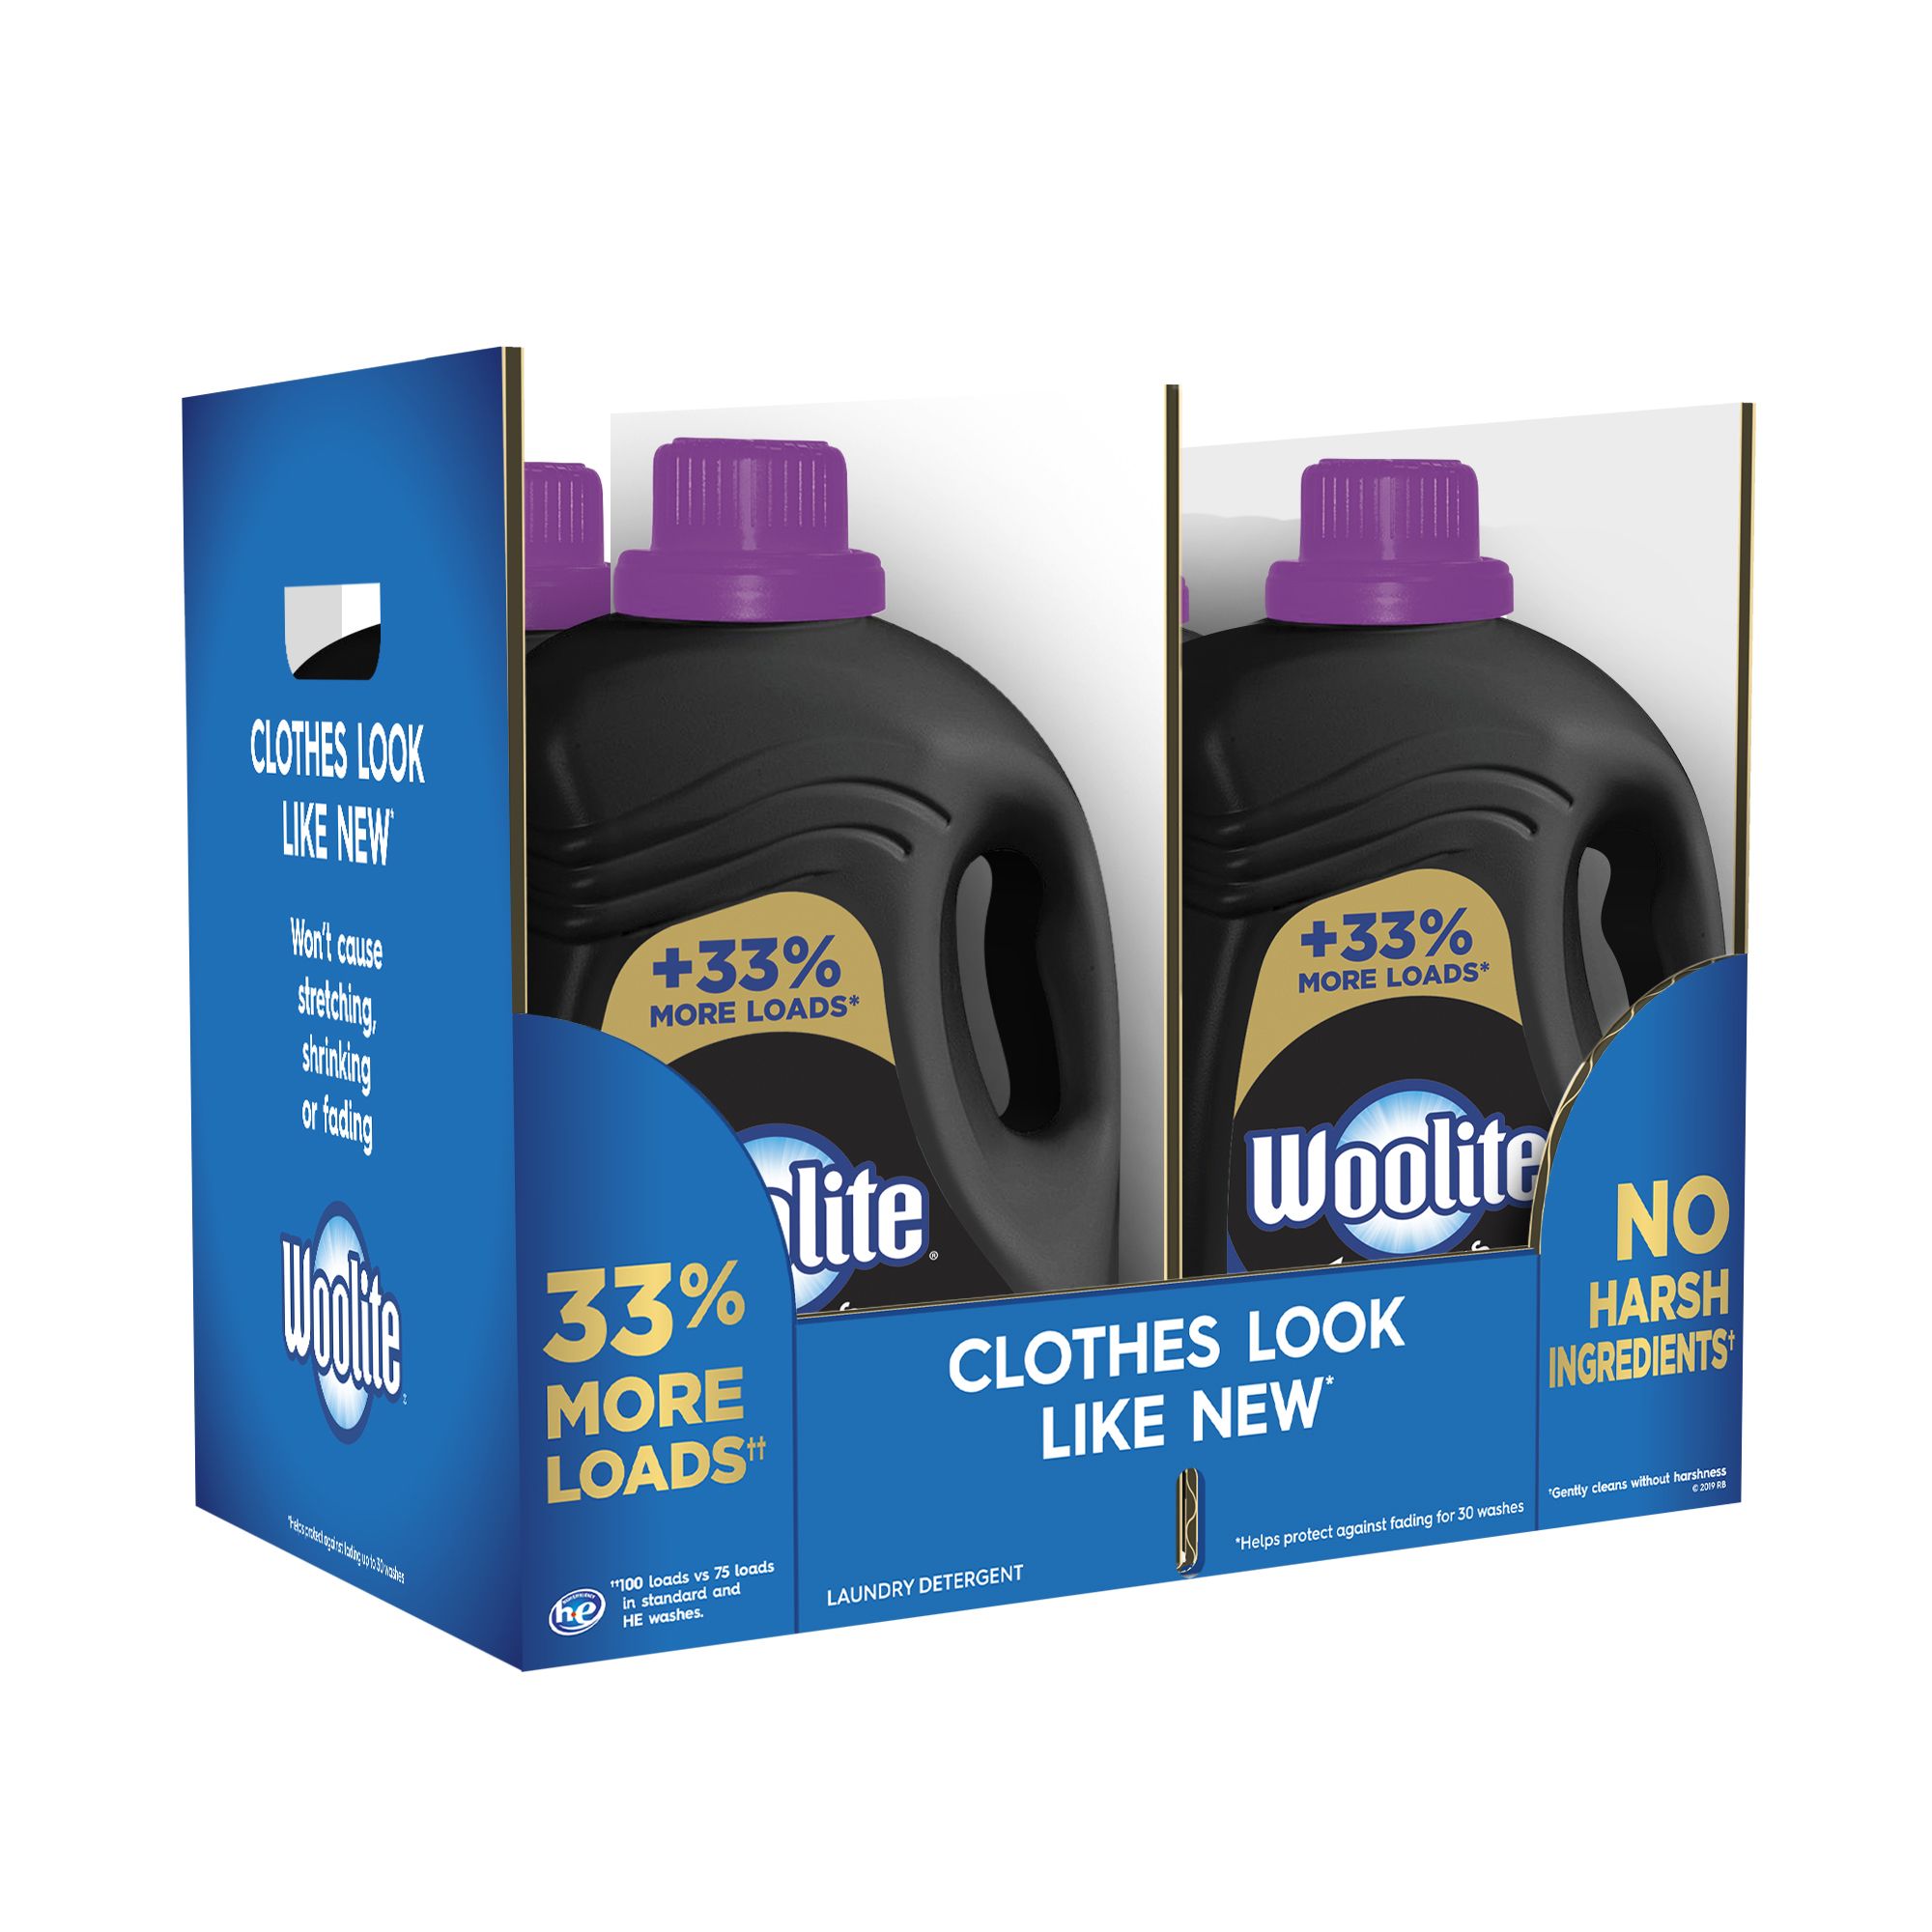 Woolite Dark Care Laundry Detergent, Midnight Breeze Scent, 50 oz/ 33 Loads  *Packaging May Vary* (Pack of 2)